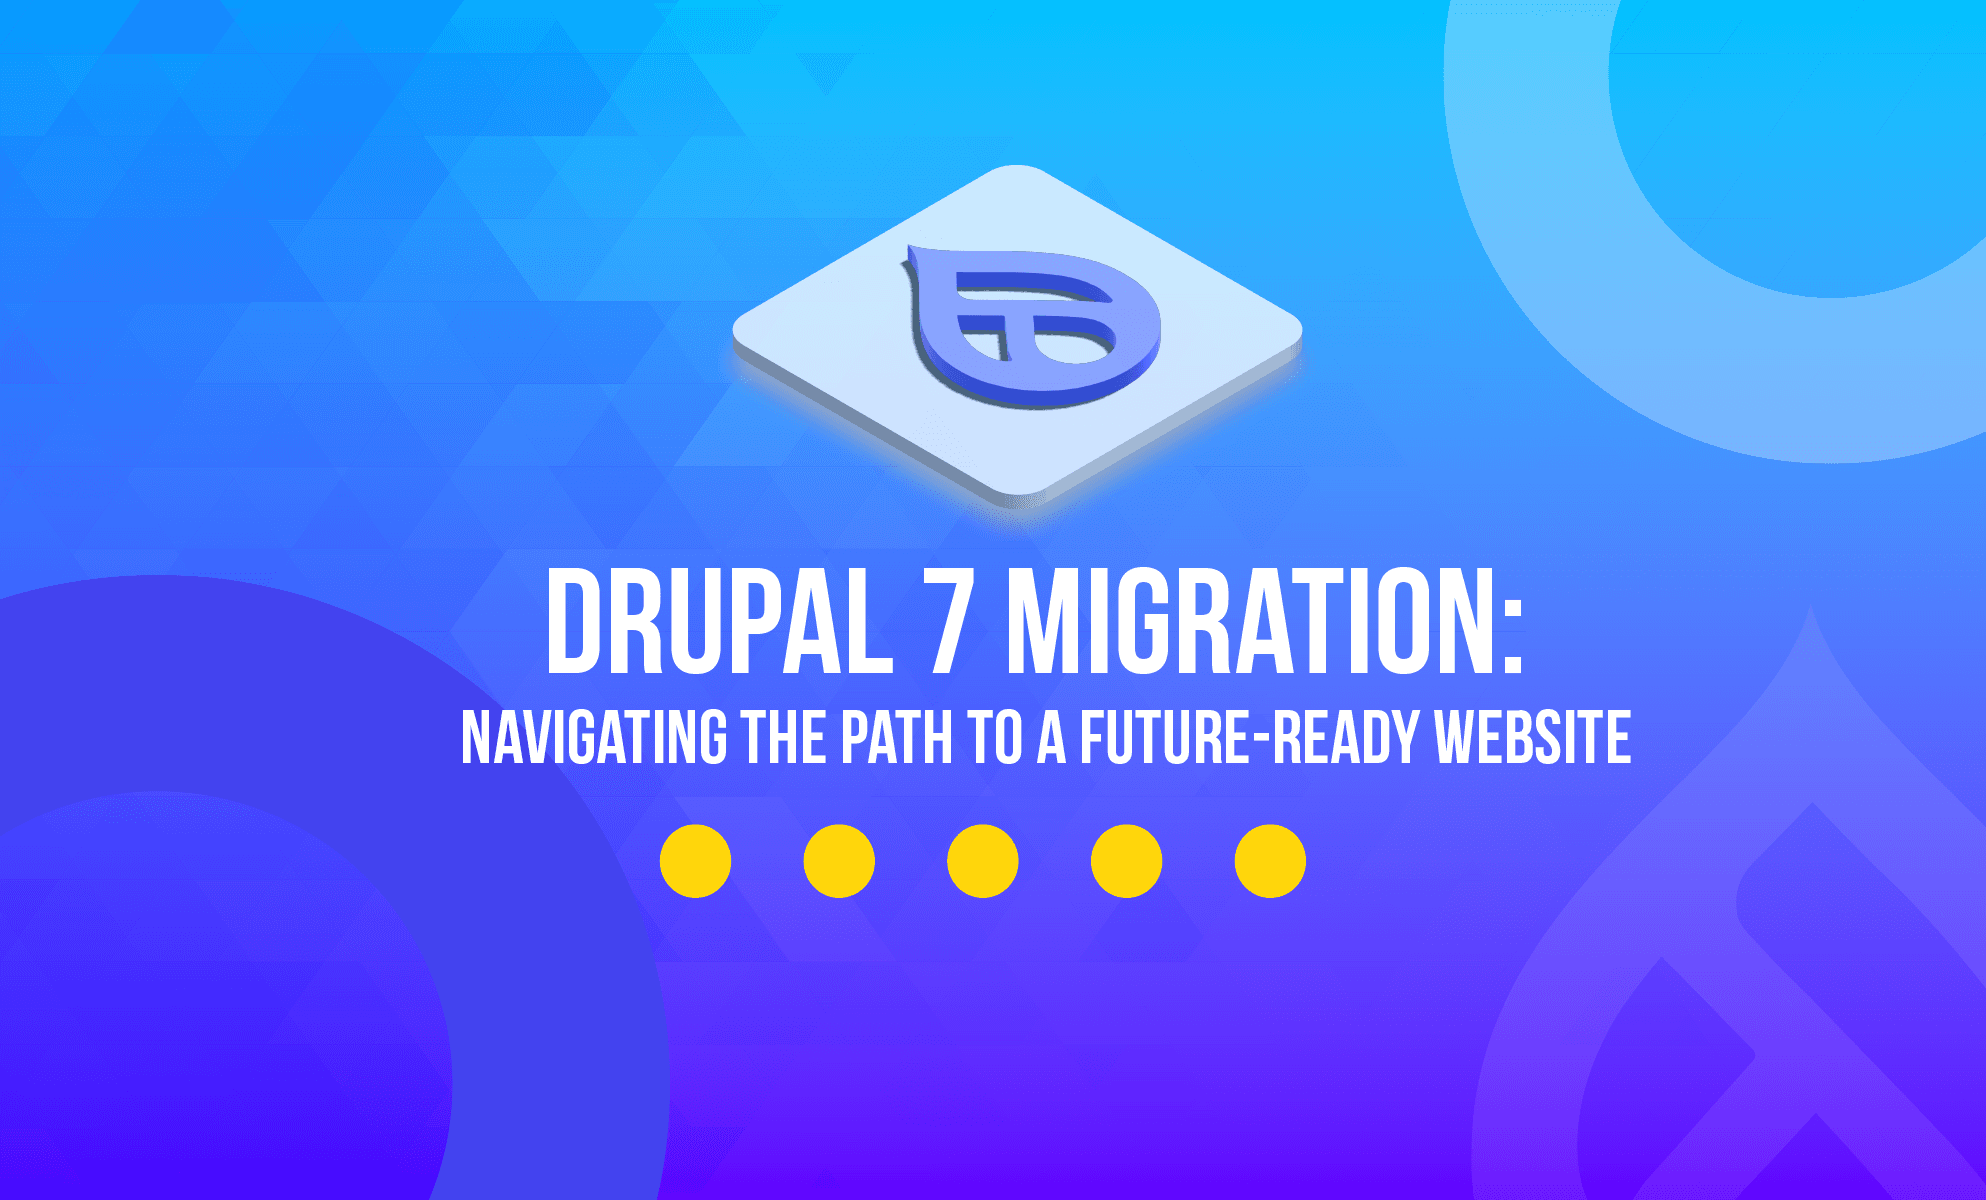 Drupal 7 migration: Navigating the path to a future-ready website